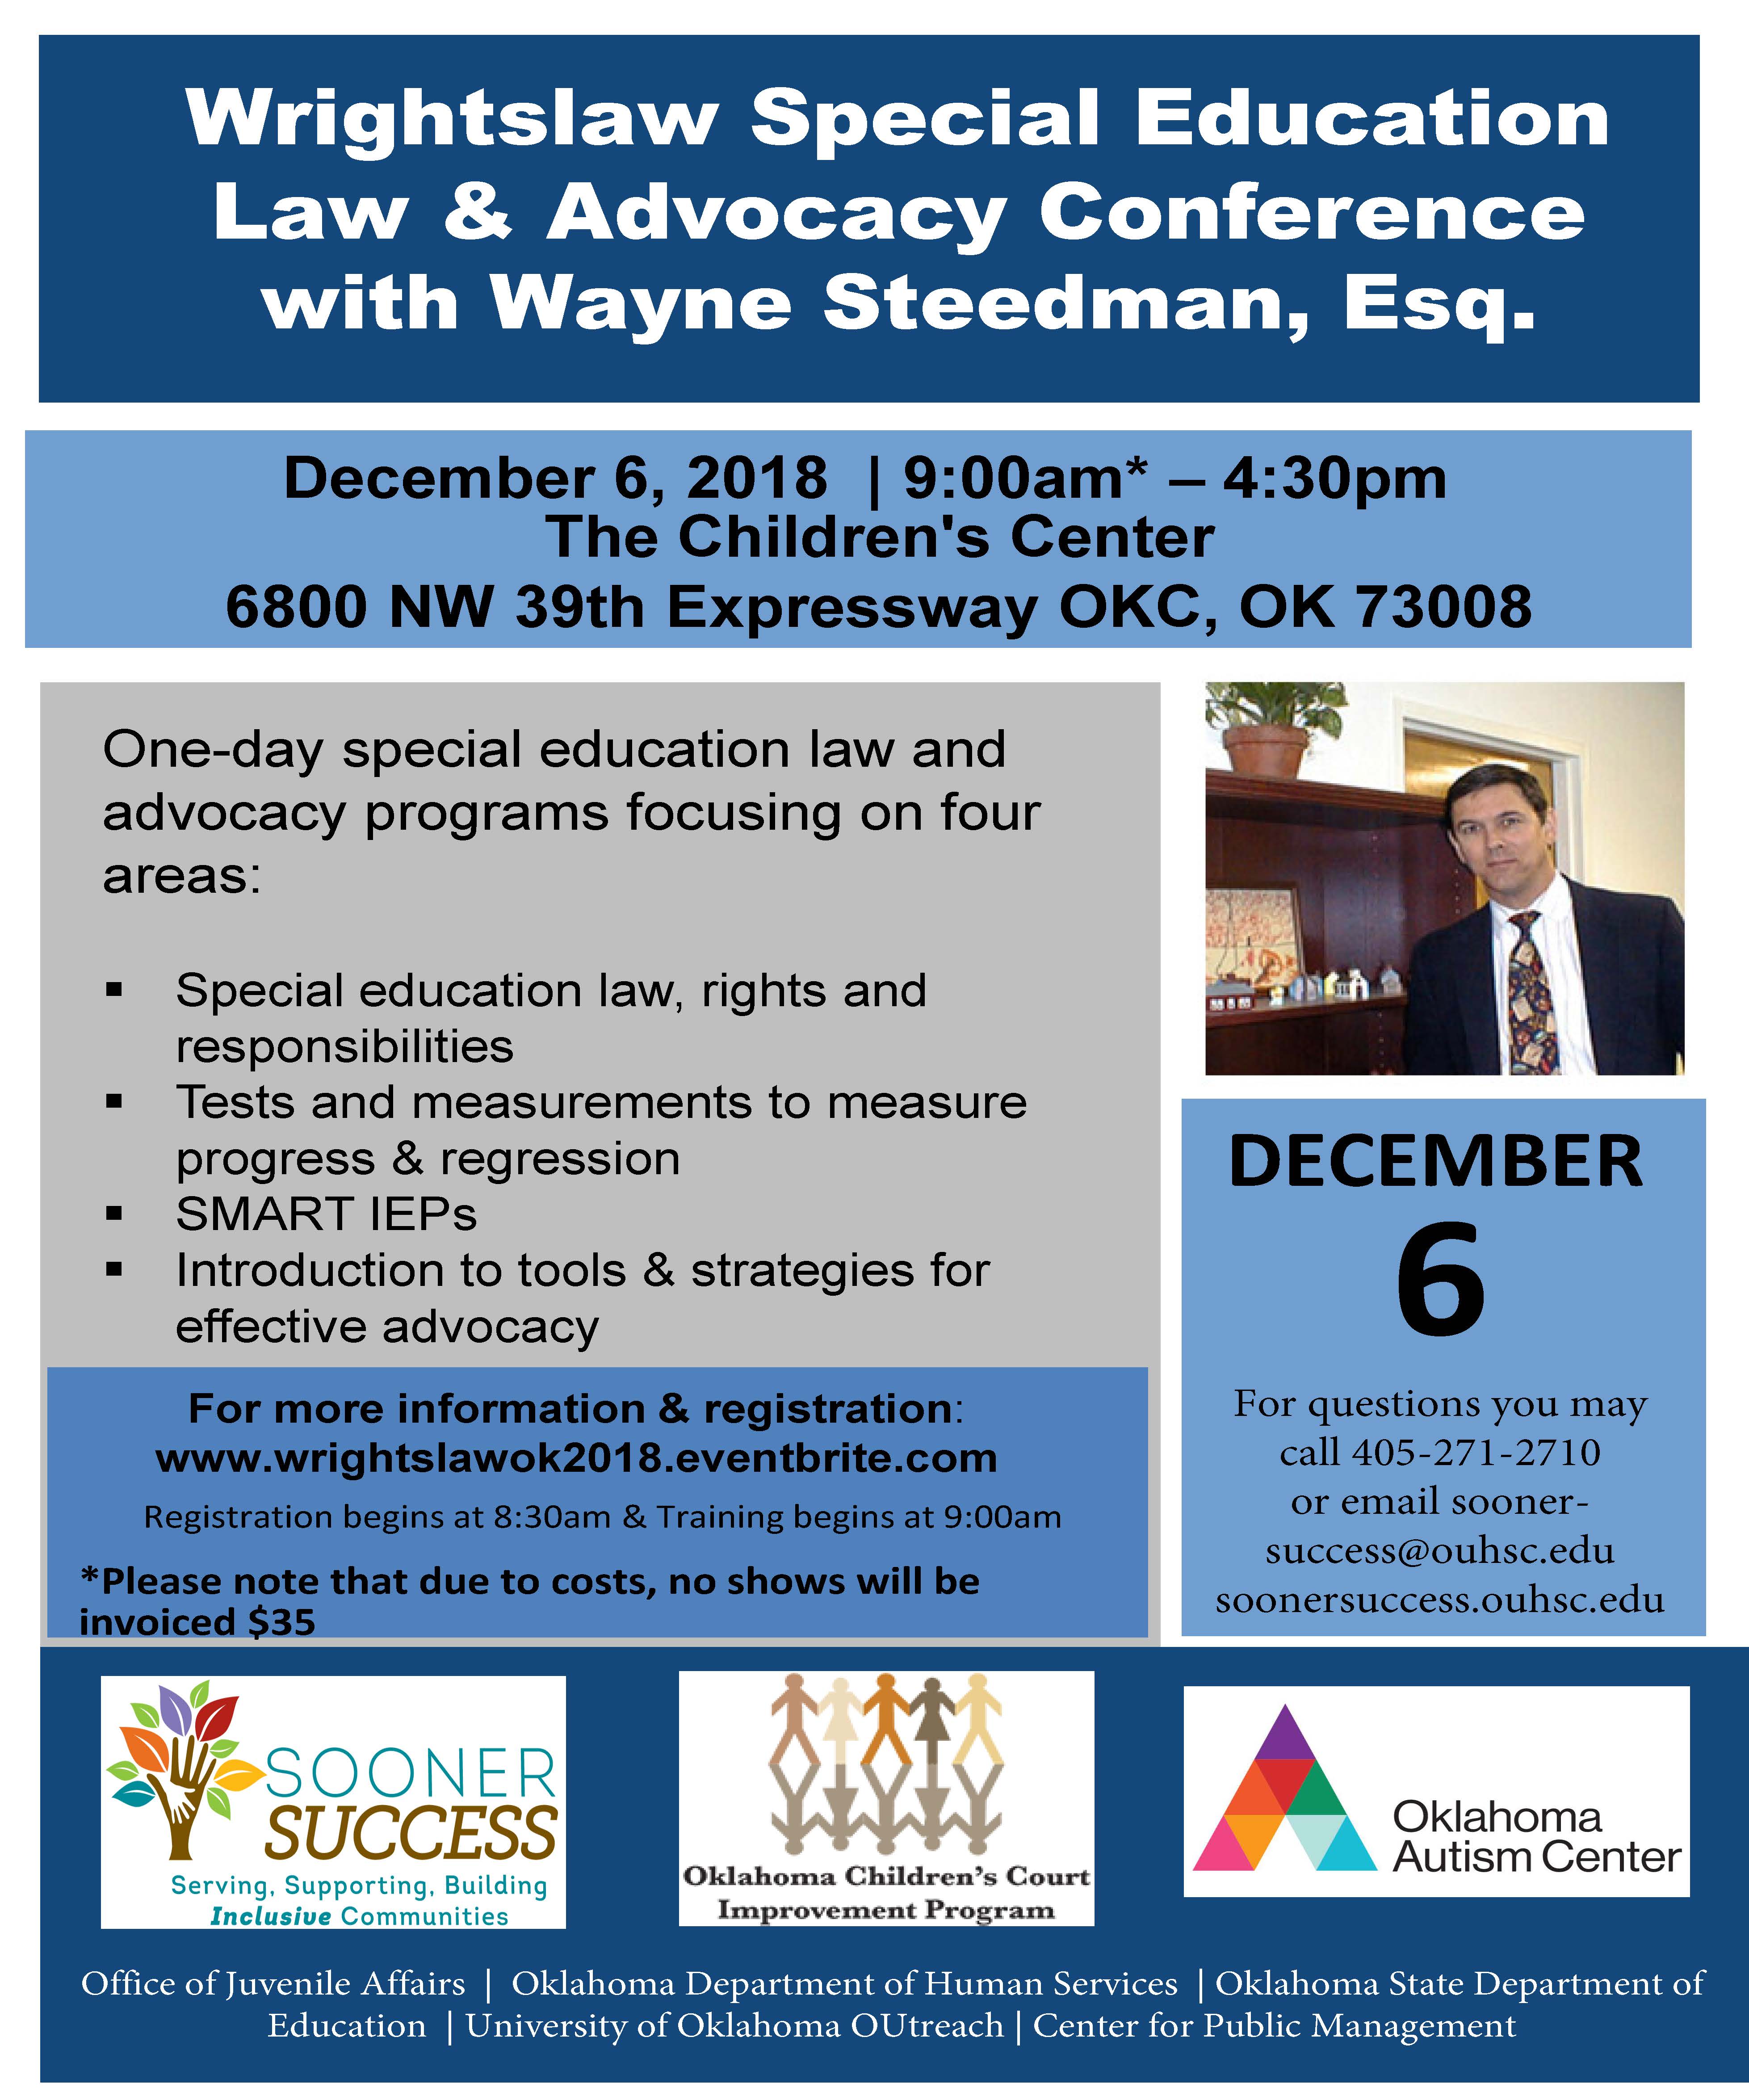 Wrightslaw Special Education Law & Advocacy Conference Sooner Success